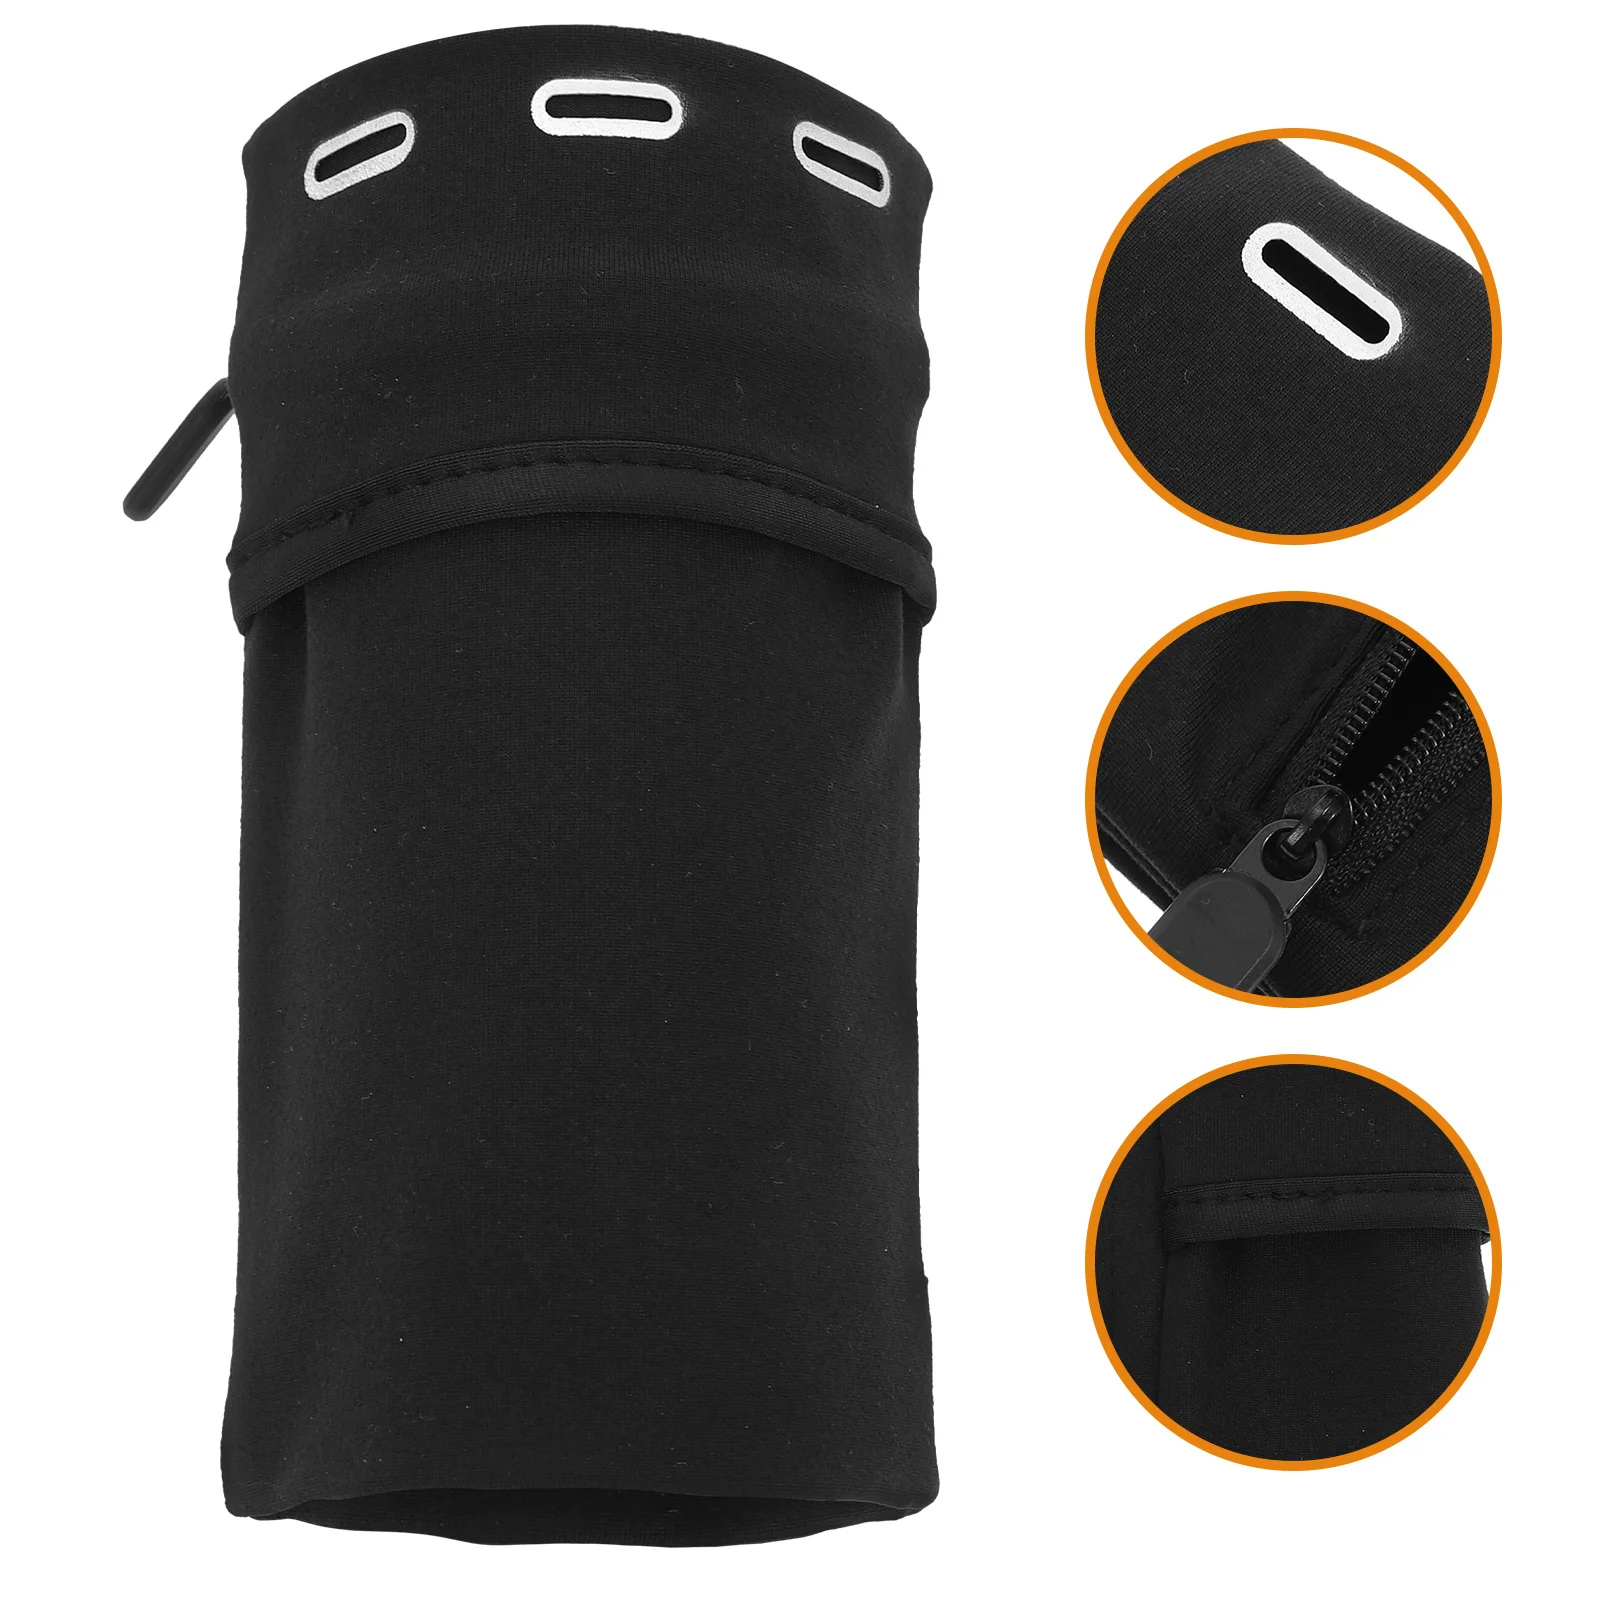 

Holder Running Armband Arm Cell Bands Workout Strap Pouch Jogging Mobile Wrist Walking Sports Armbands Women Carrying Keys